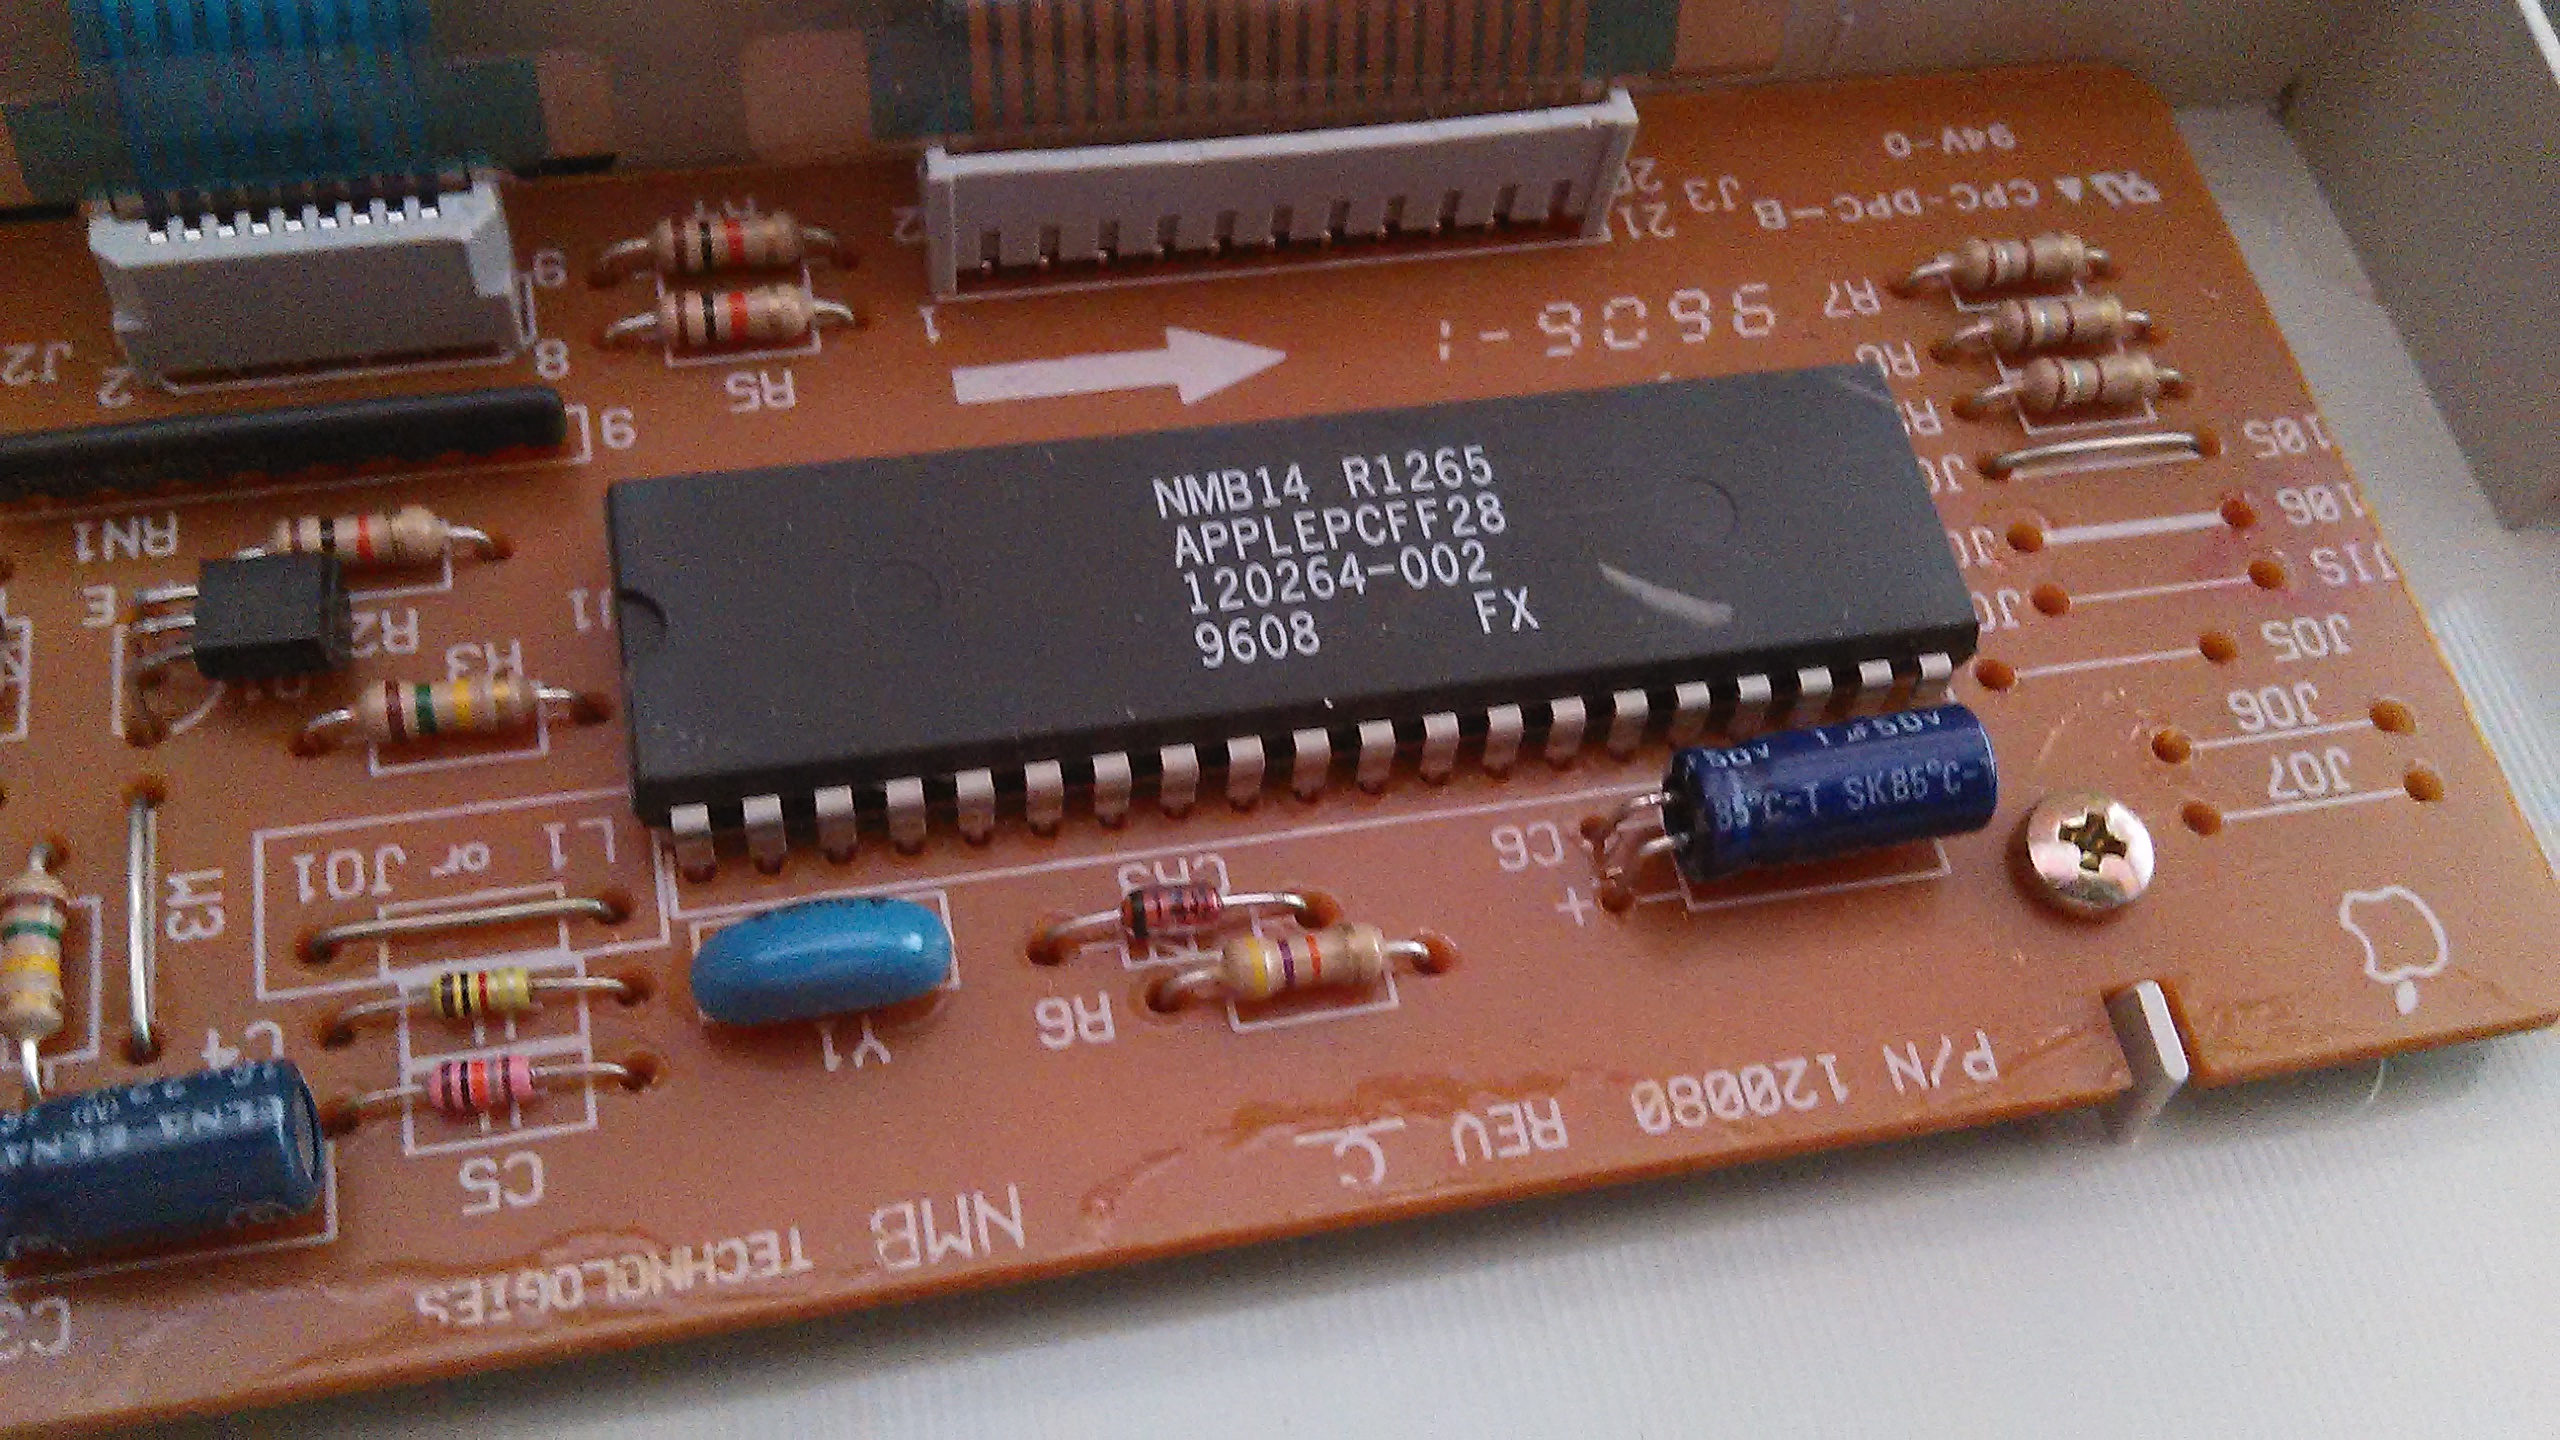 Notice that the board IS made by NMB Technologies. Also notice the 2 ribbon cables that is connected to it.